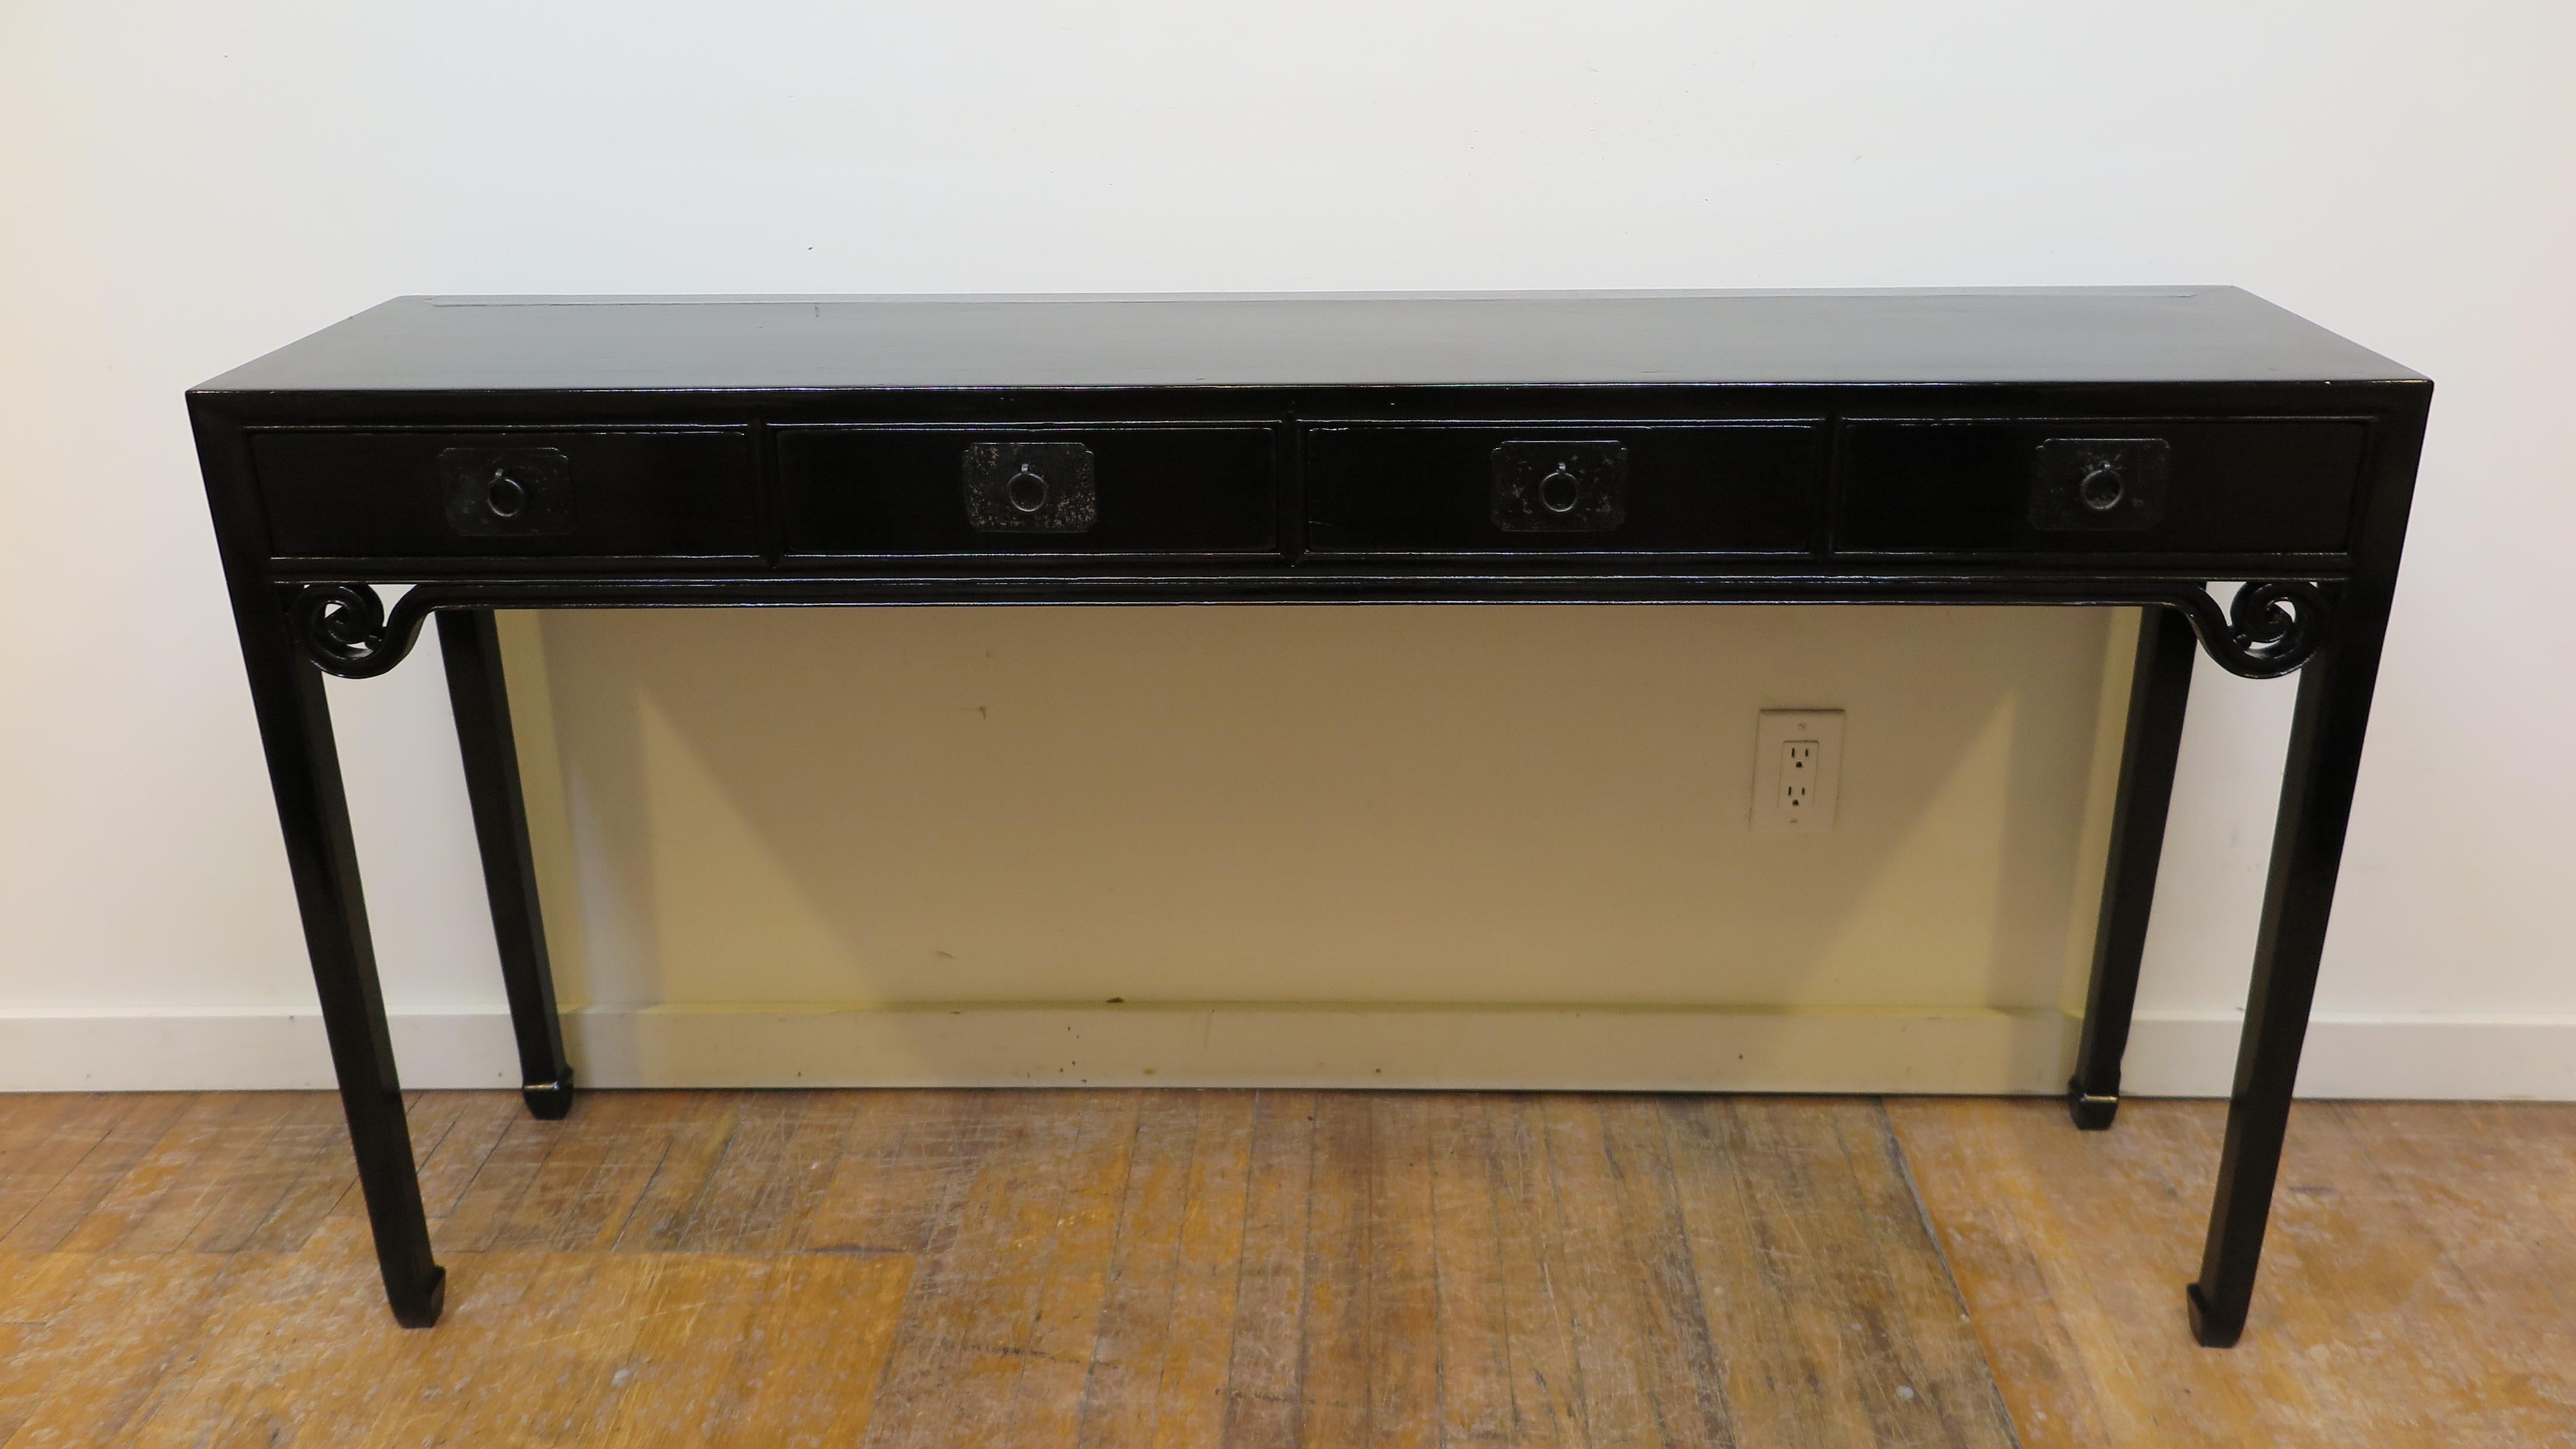 Antique Chinese black lacquer console table. Four drawer console table having scroll spandrel apron detail on tapered legs terminating to horse hoof feet. Minimal clean lines solid elmwood showcased in black lacquer. A very elegant functional